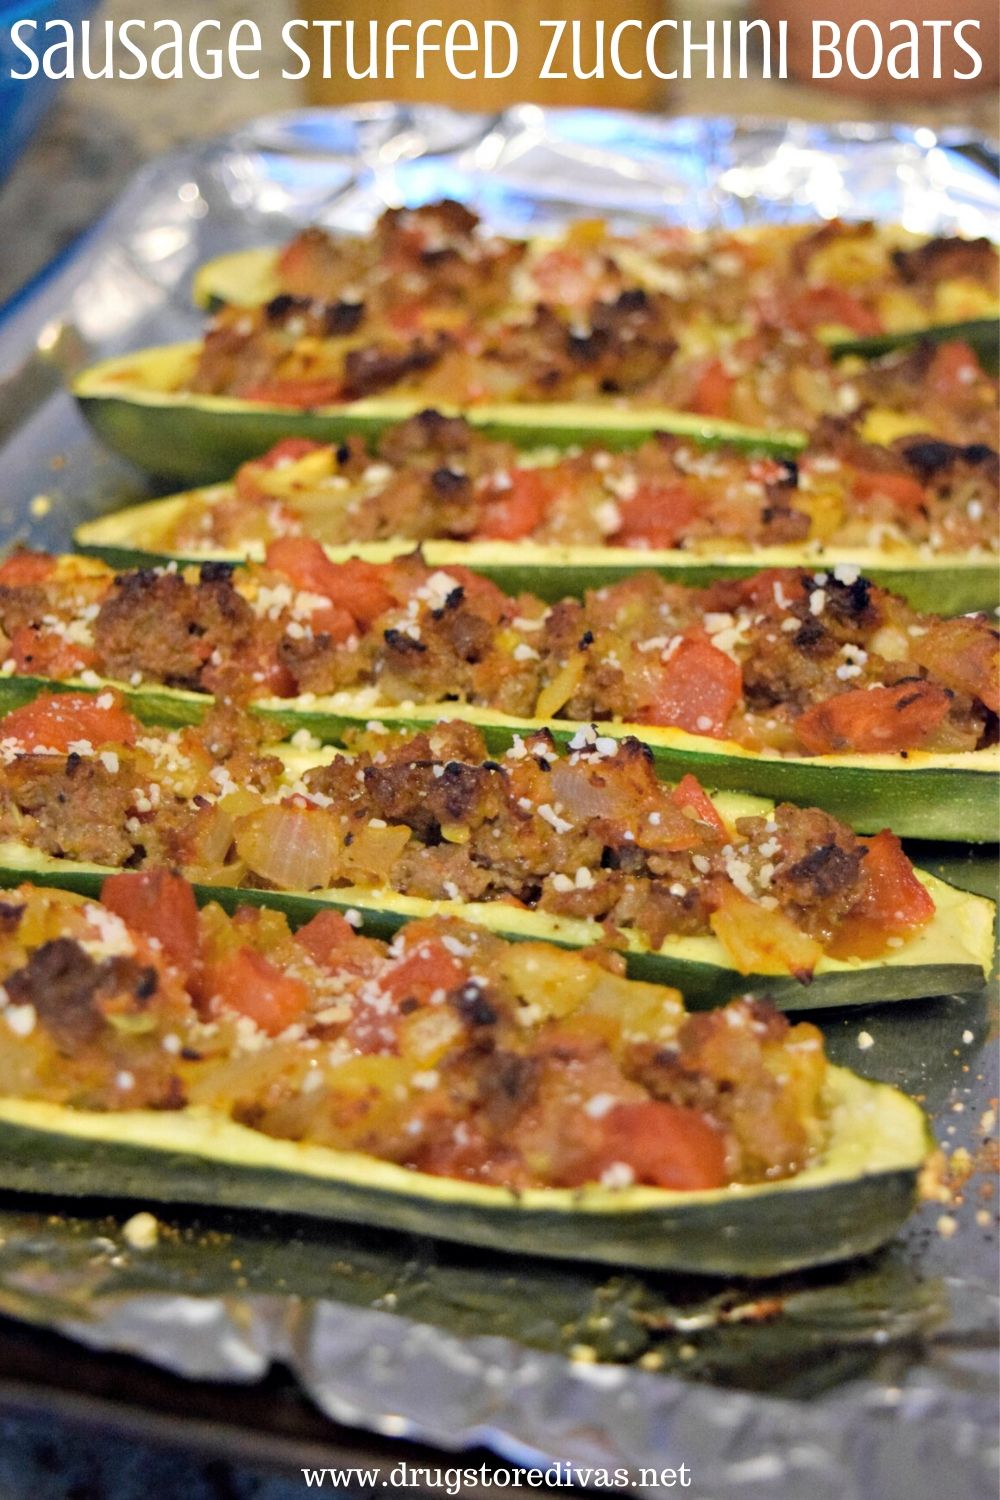 Sausage Stuffed Zucchini Boats are stuffed with sausage, tomatoes, onions, and more. They're good for keto and WW too. 